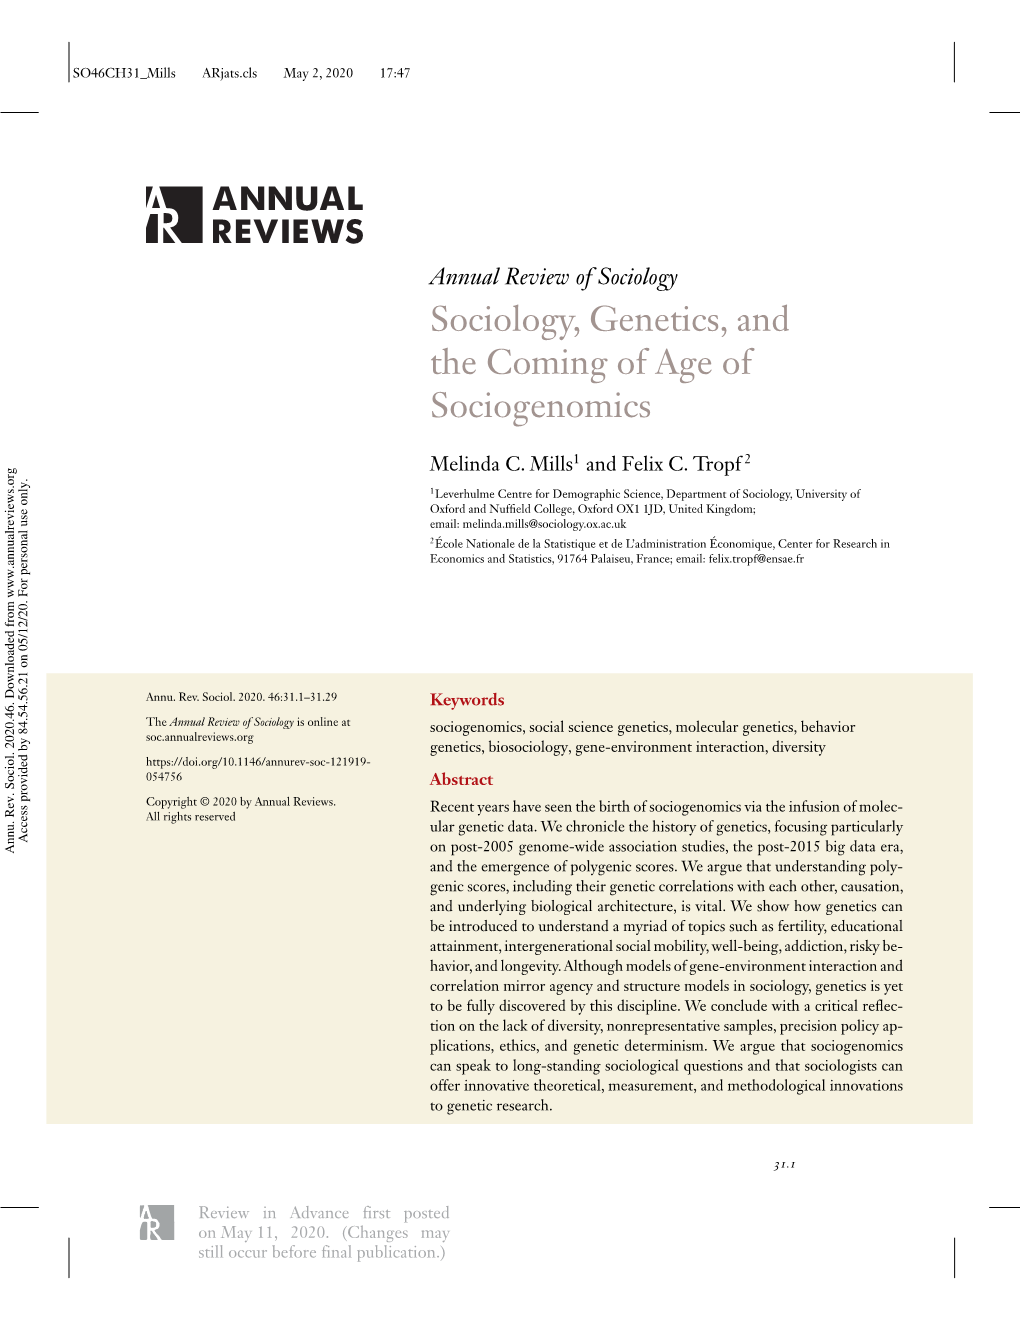 Sociology, Genetics, and the Coming of Age of Sociogenomics